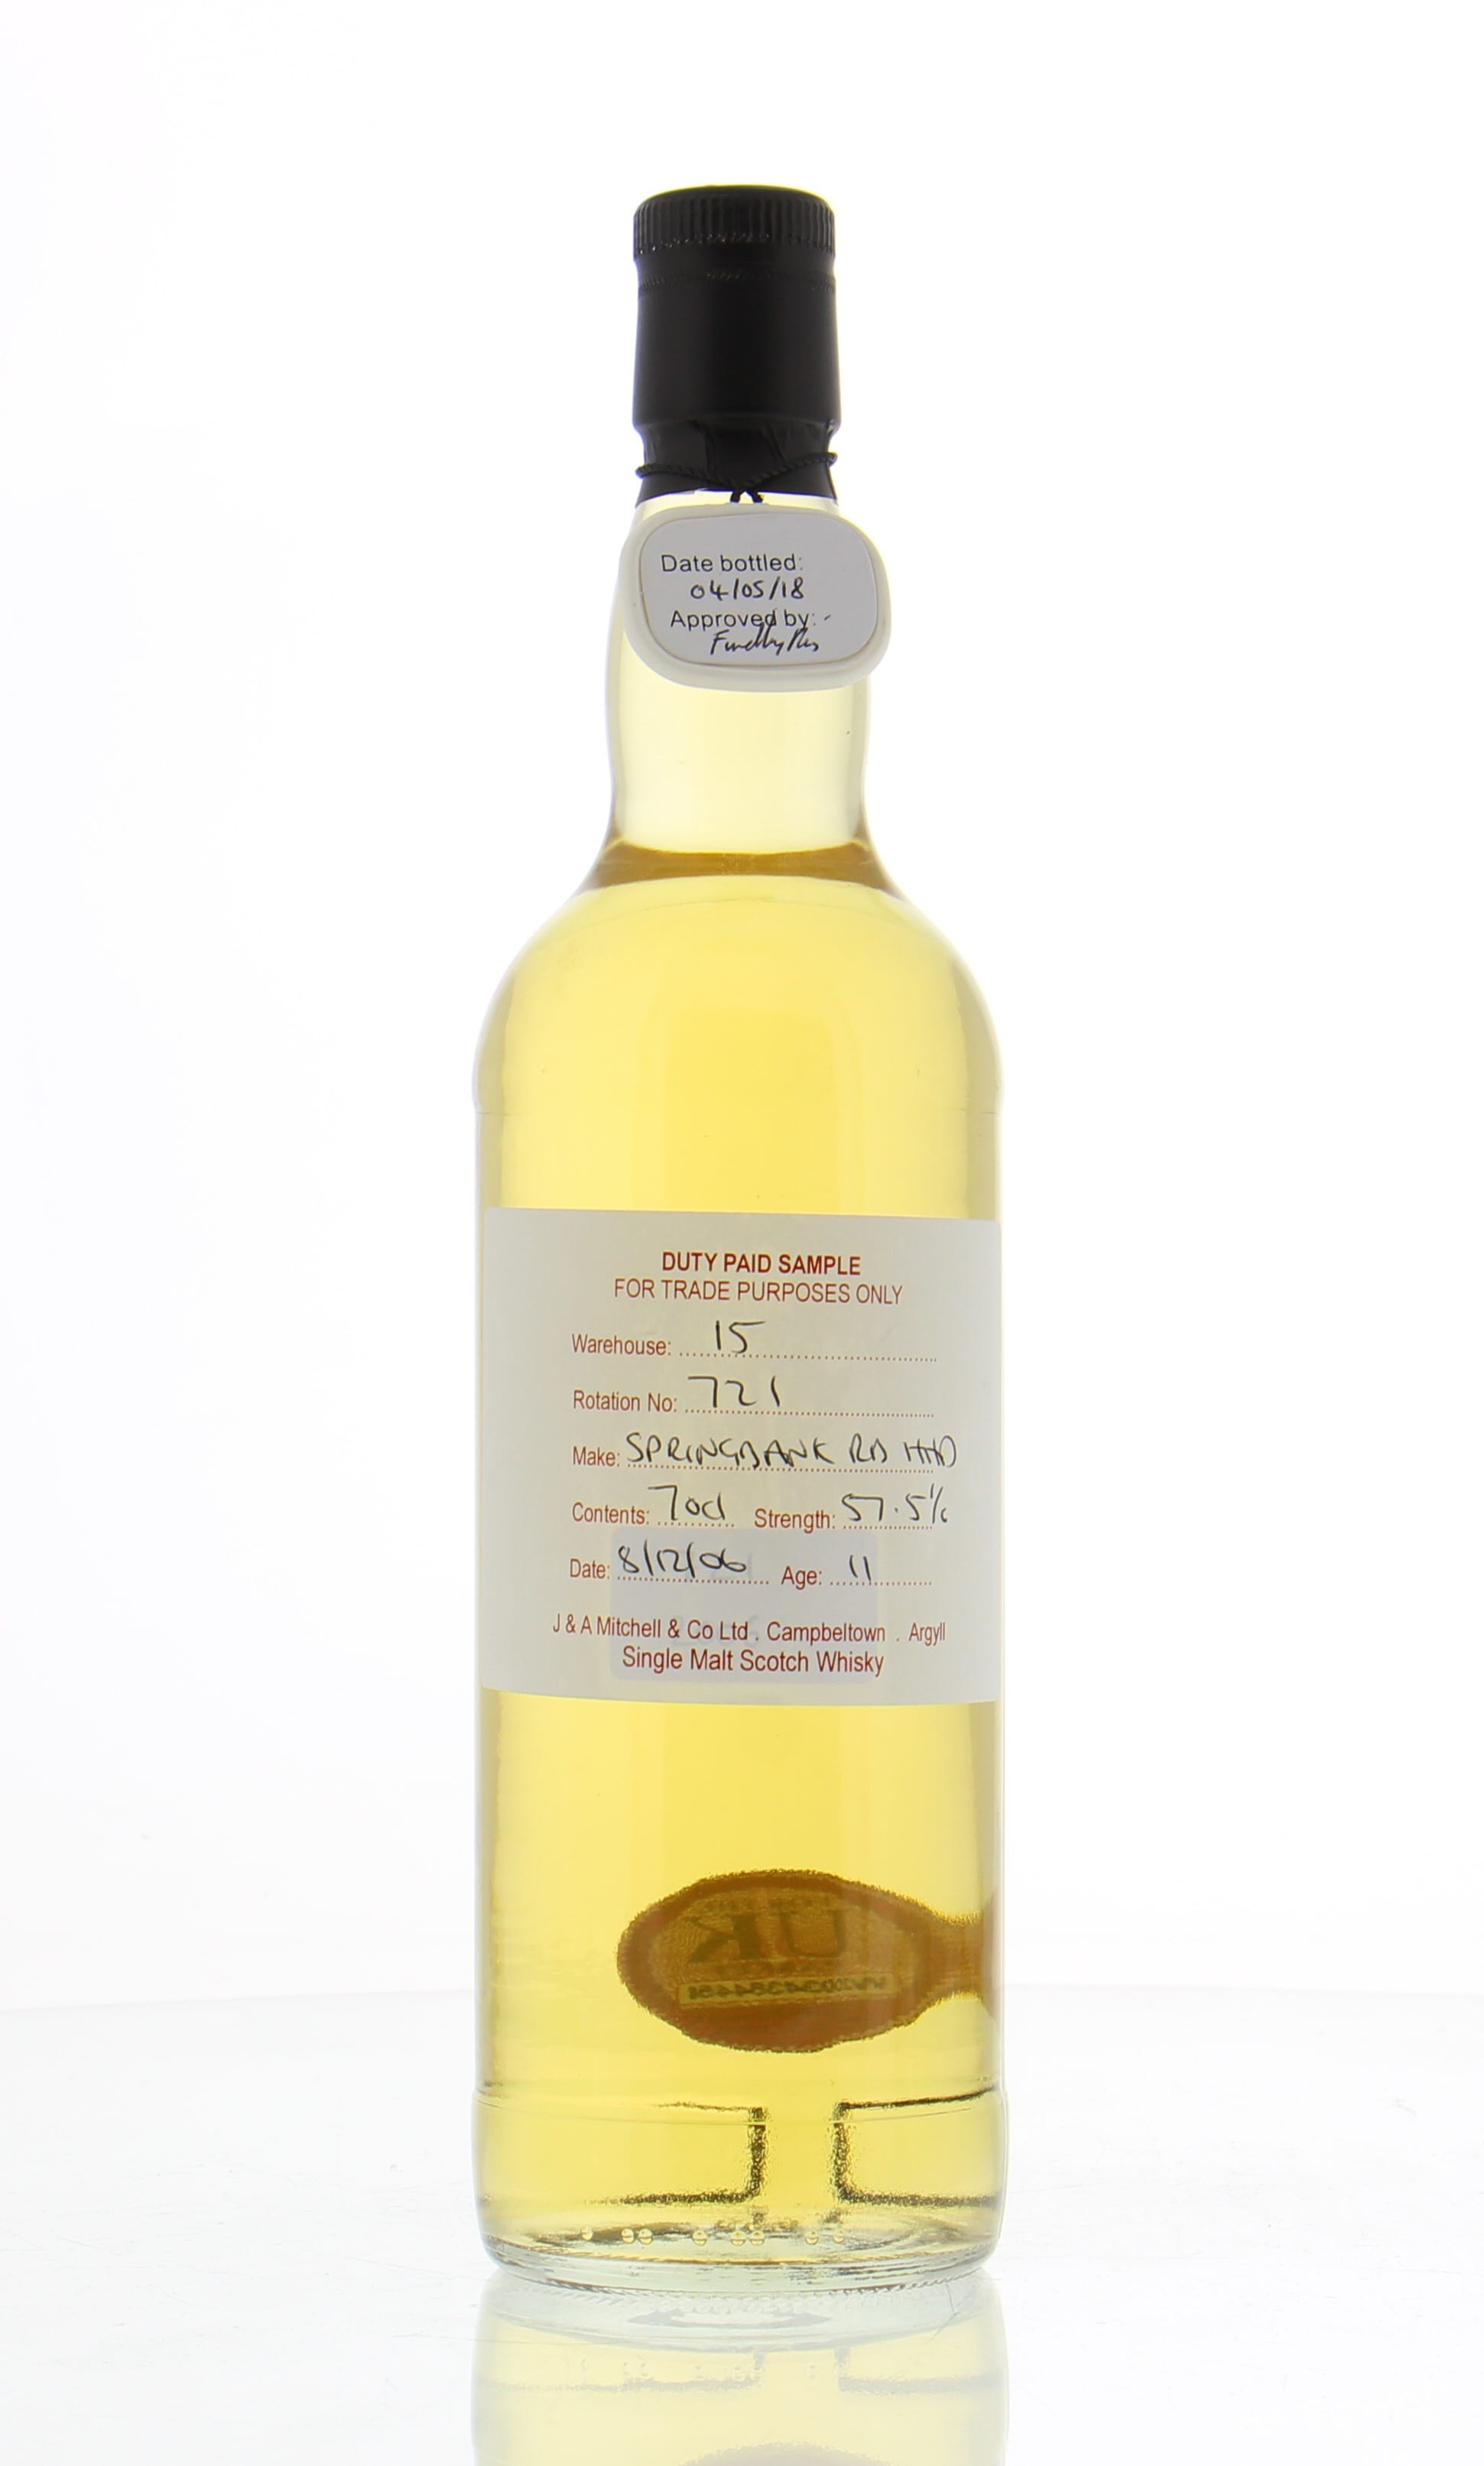 Springbank - 11 Years Old Duty Paid Sample Warehouse 15 Rotation 721 57.5% 2006 Perfect